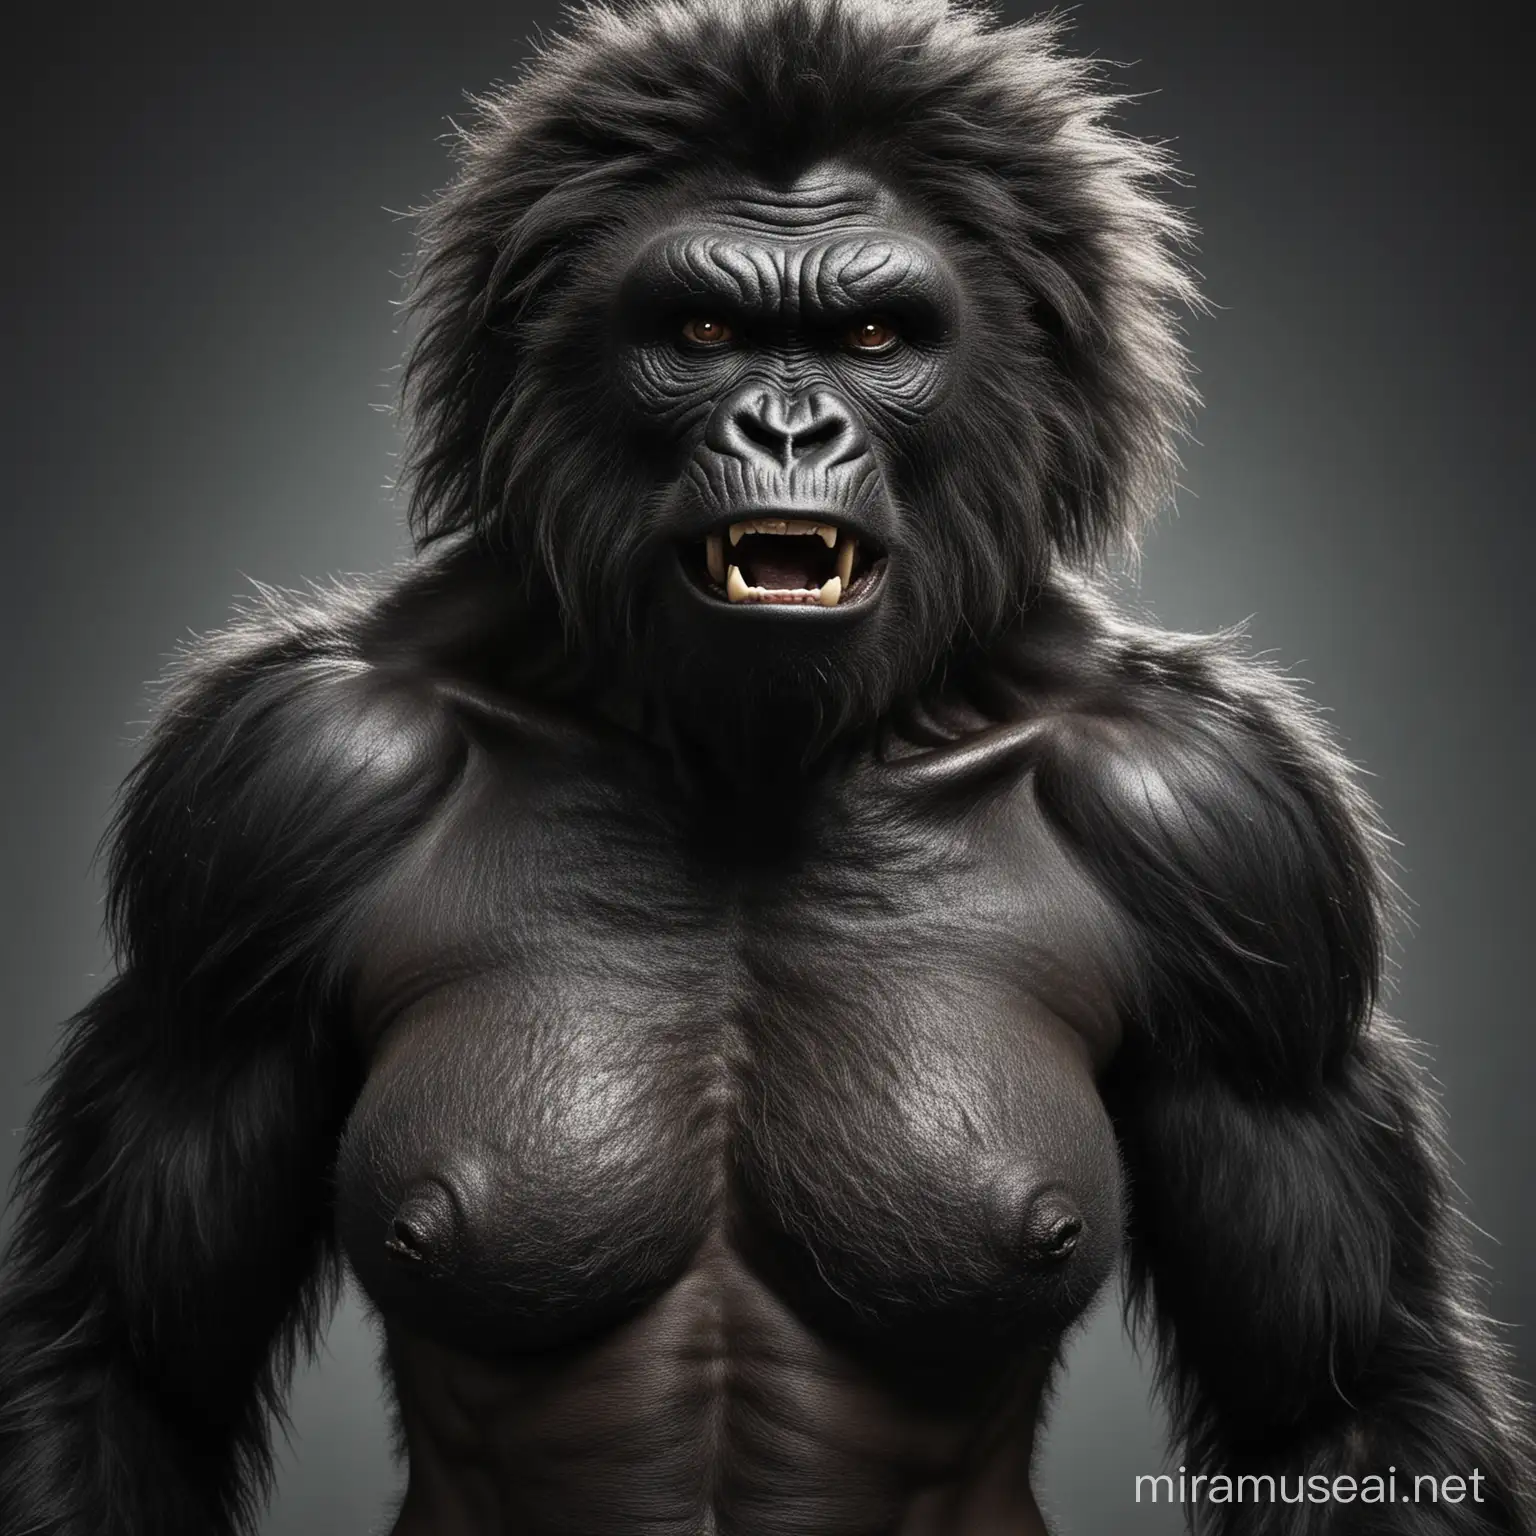 Transformation into Weregorilla Hairy Woman with Black Skin and Gorilla Features